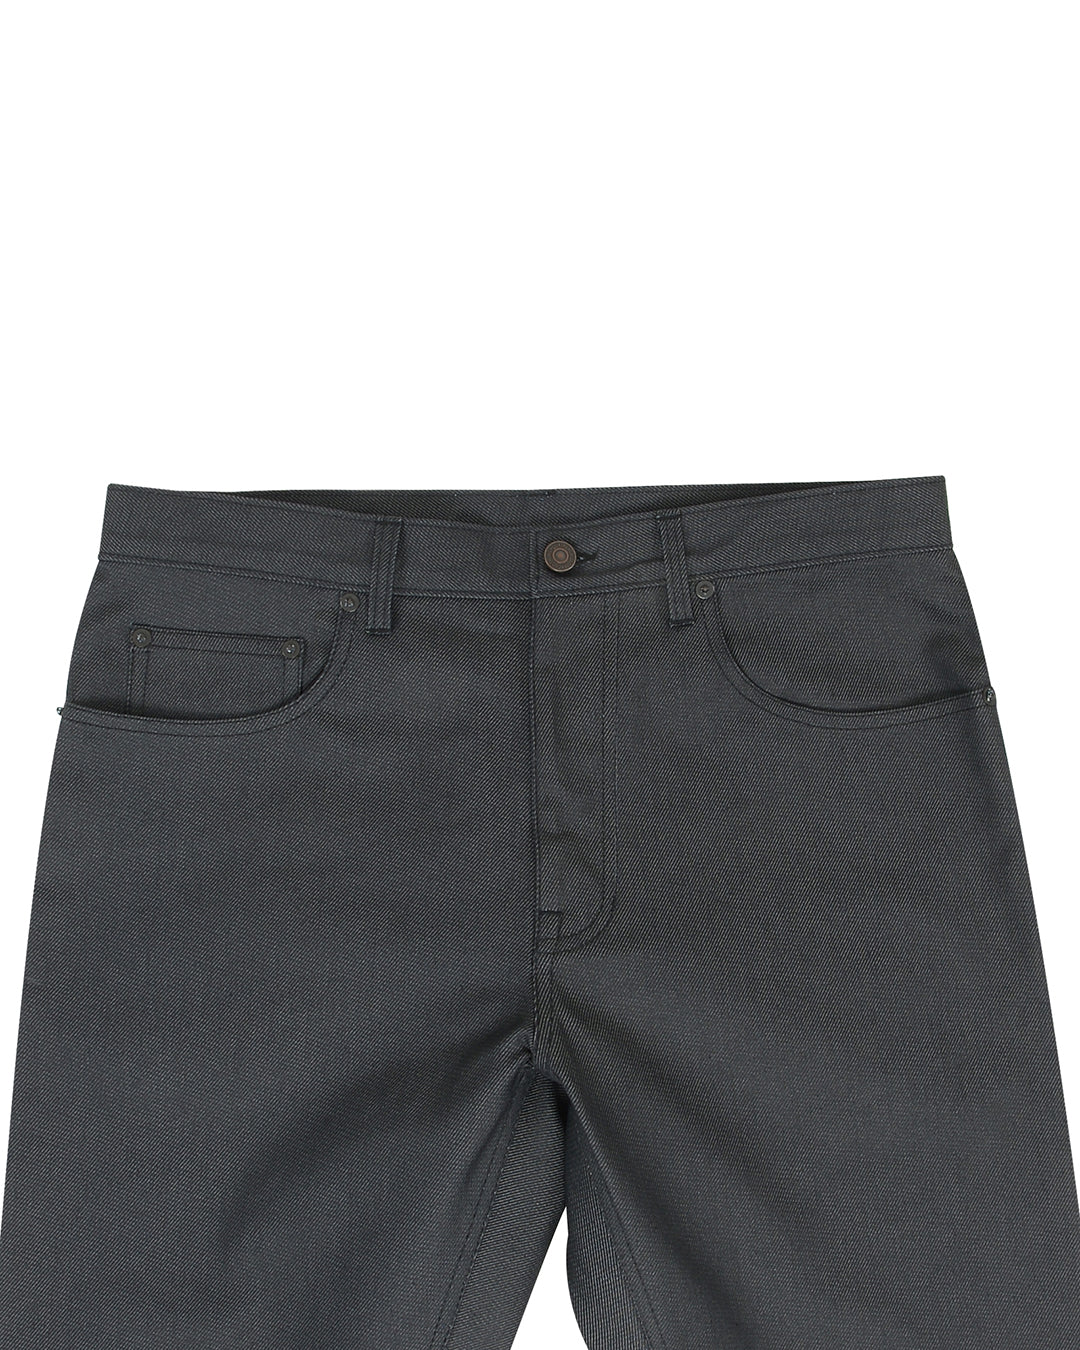 Waxed Jeans Charcoal Grey